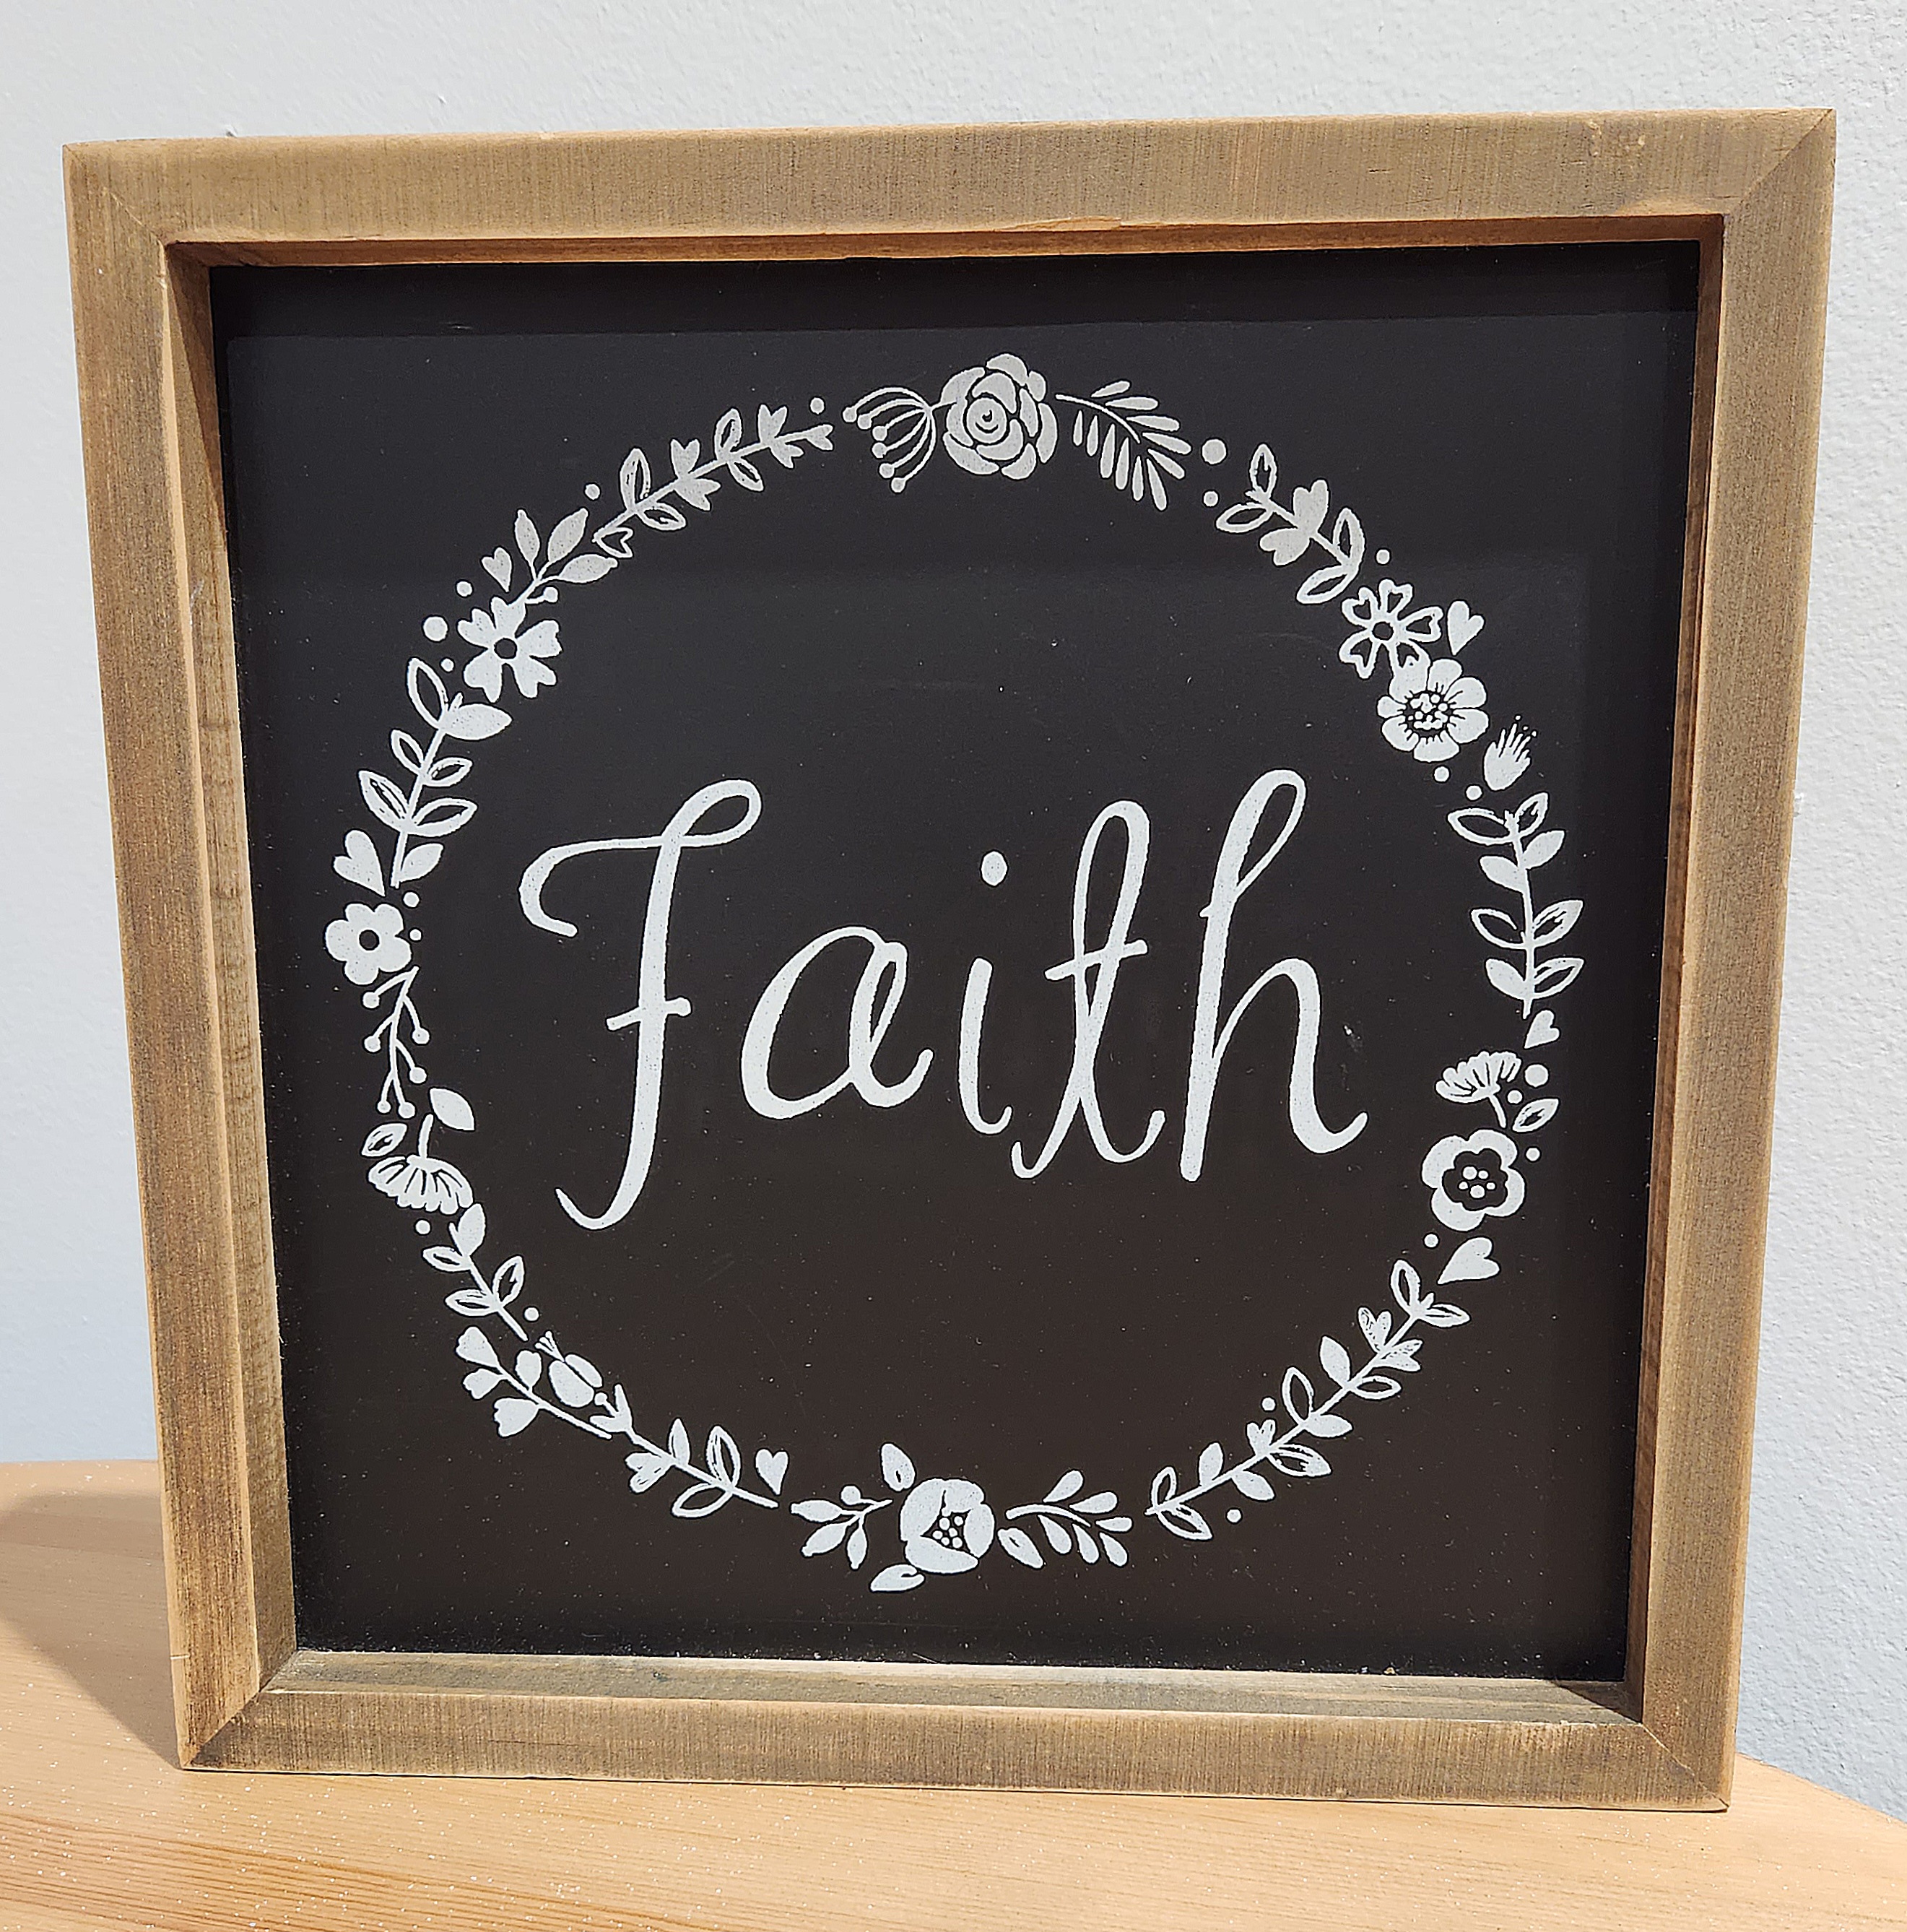 This Faith Wood Sign is made with love by Perfectly Imperfect Home Boutique! Shop more unique gift ideas today with Spots Initiatives, the best way to support creators.